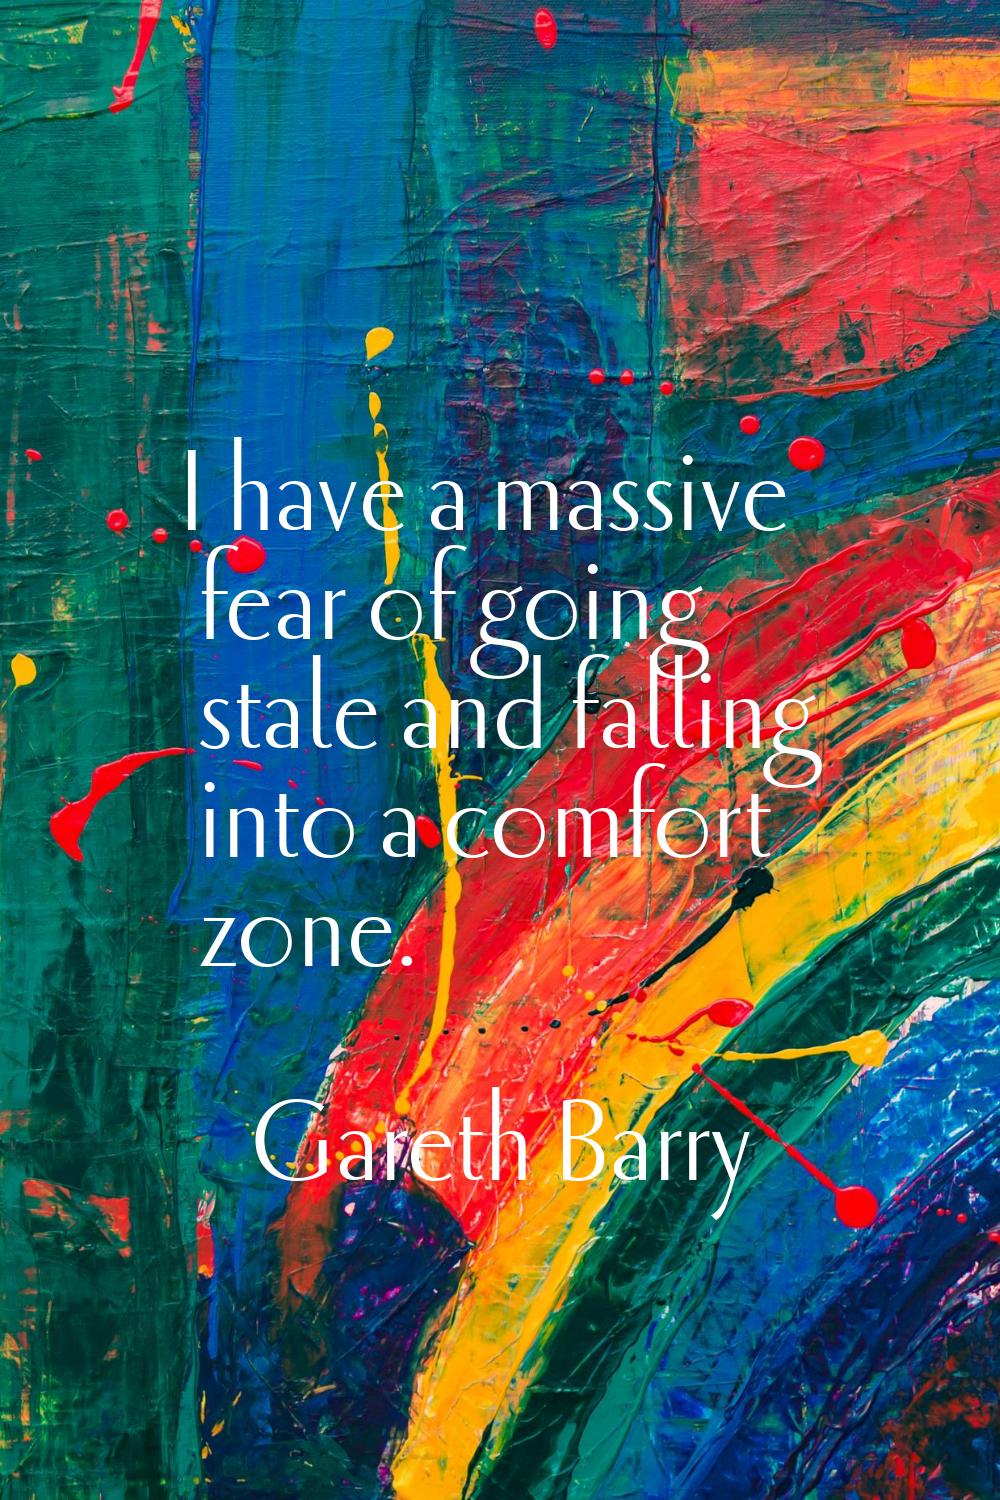 I have a massive fear of going stale and falling into a comfort zone.